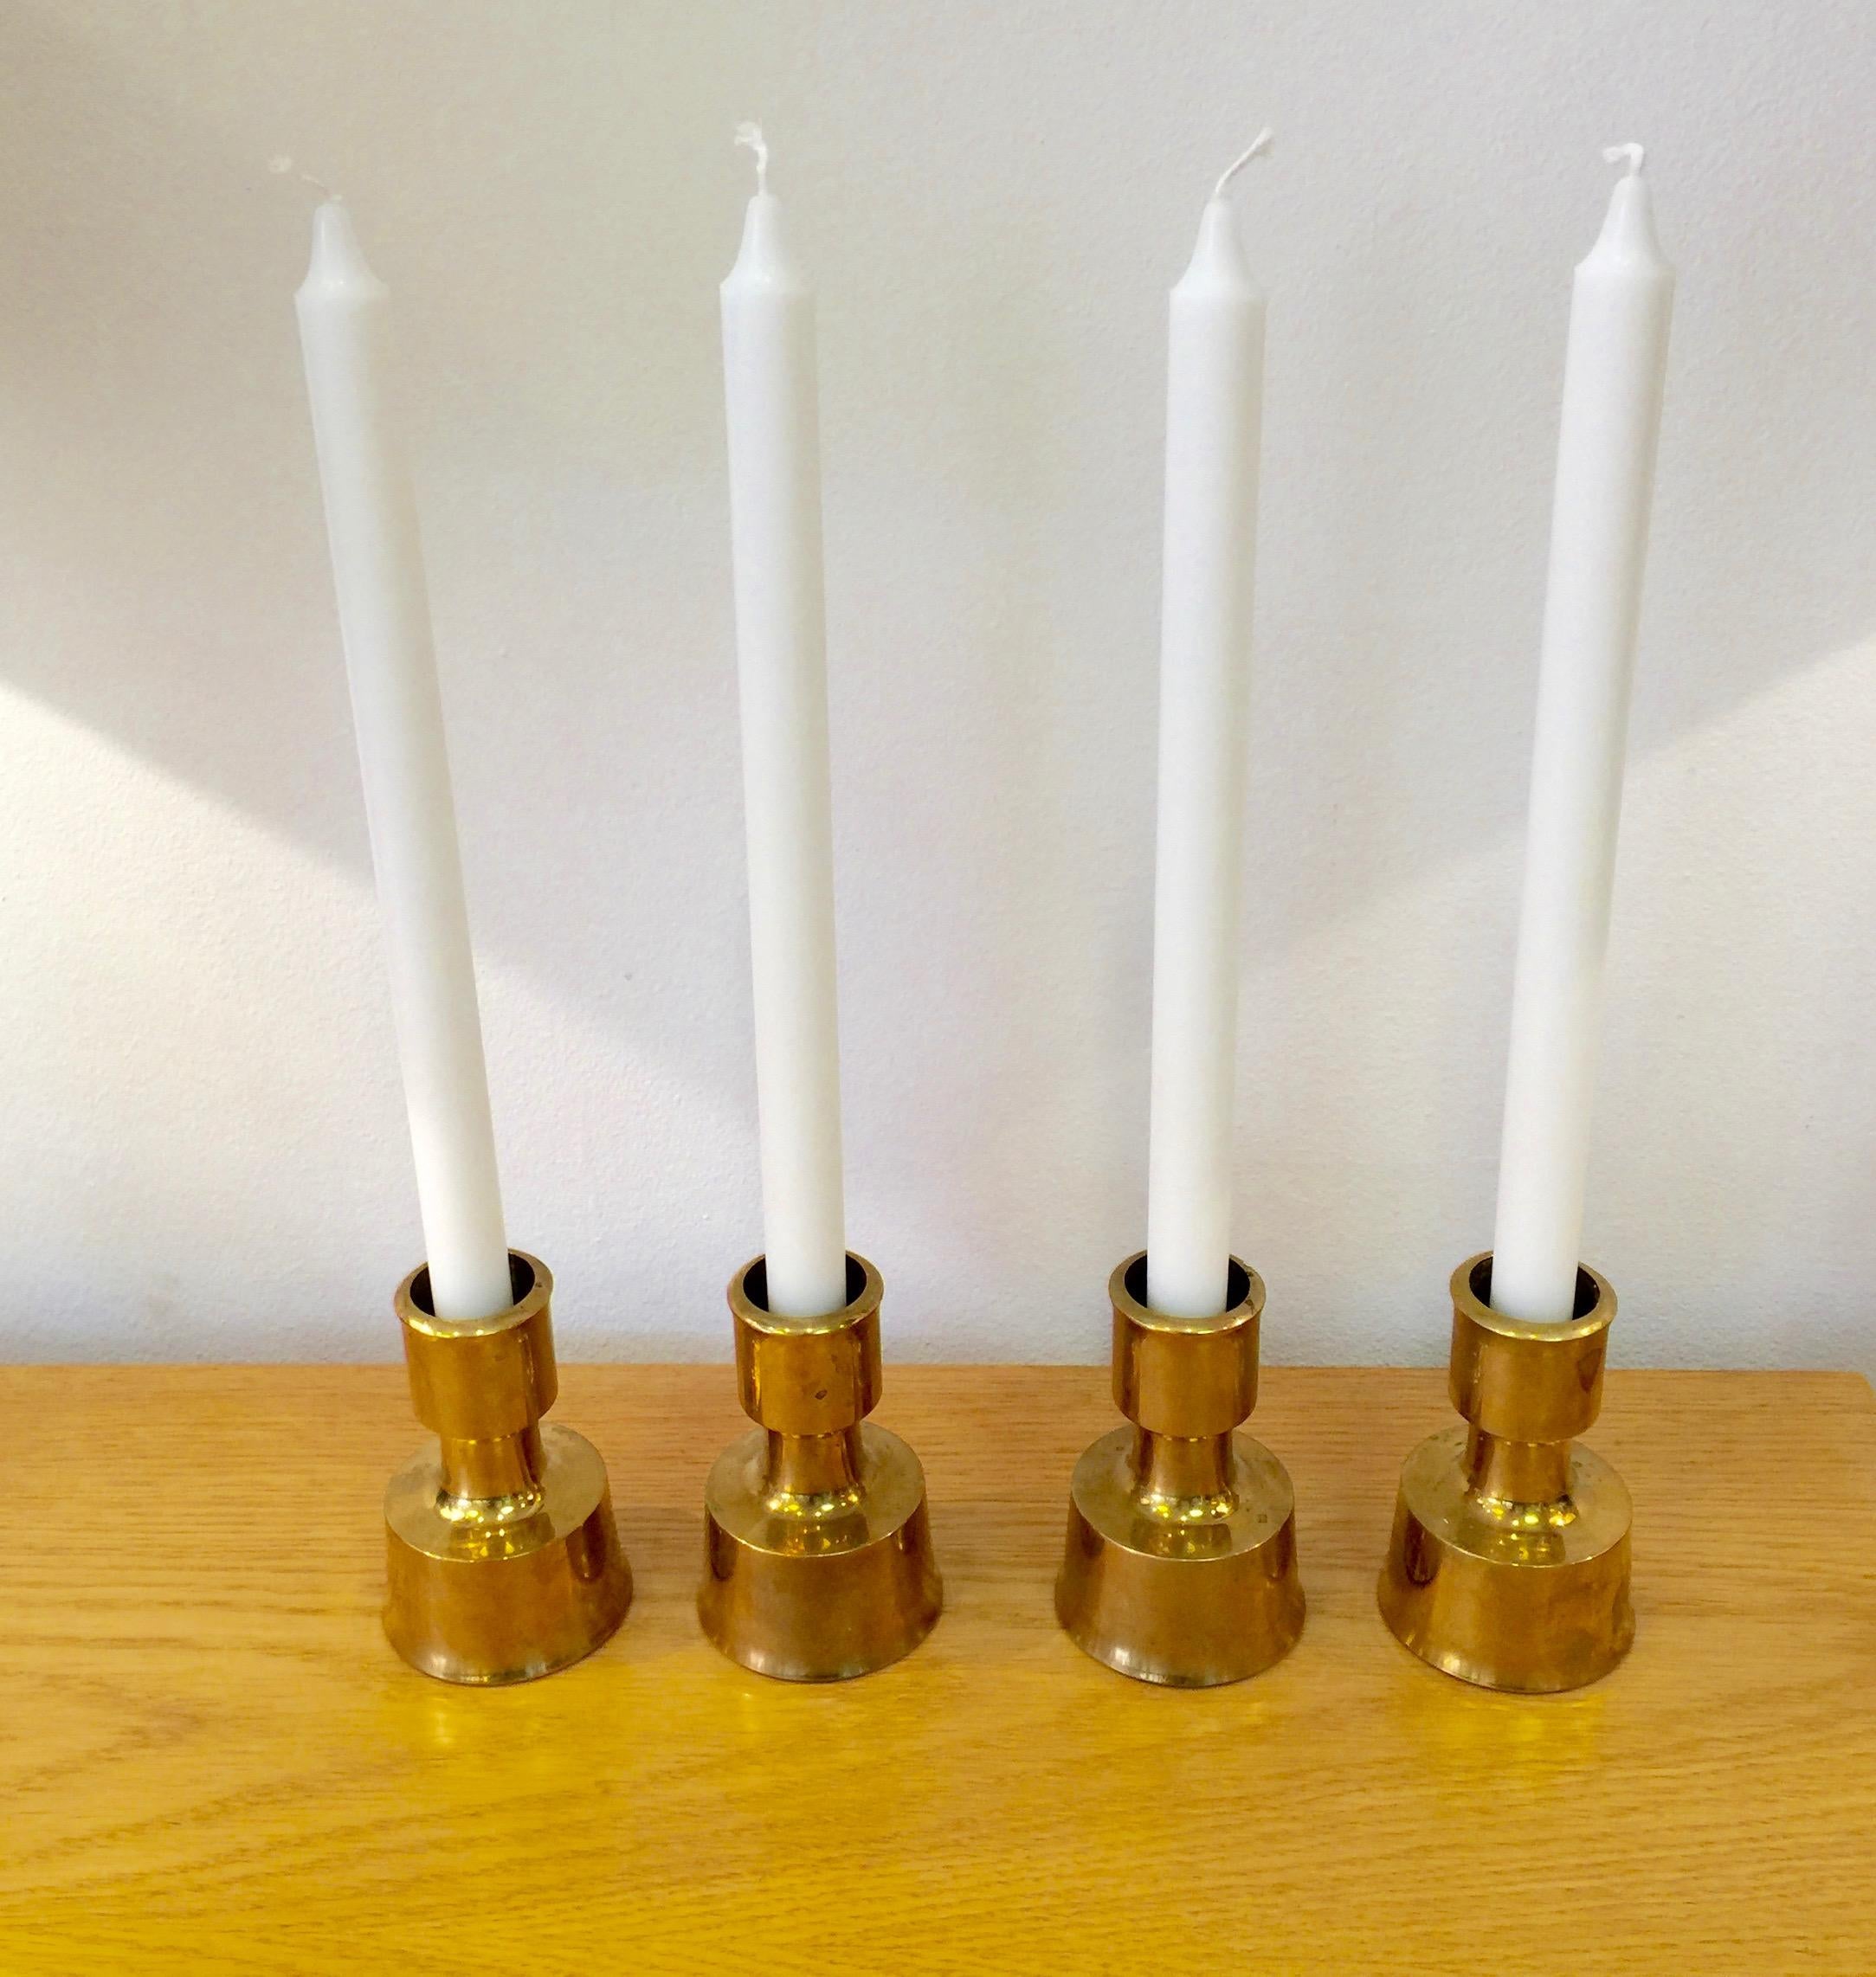 Set of 4 solid brass candlesticks by Jens H. Quistgaard and manufactured by Dansk design. Provenance: From the home of Kurt Östervig.